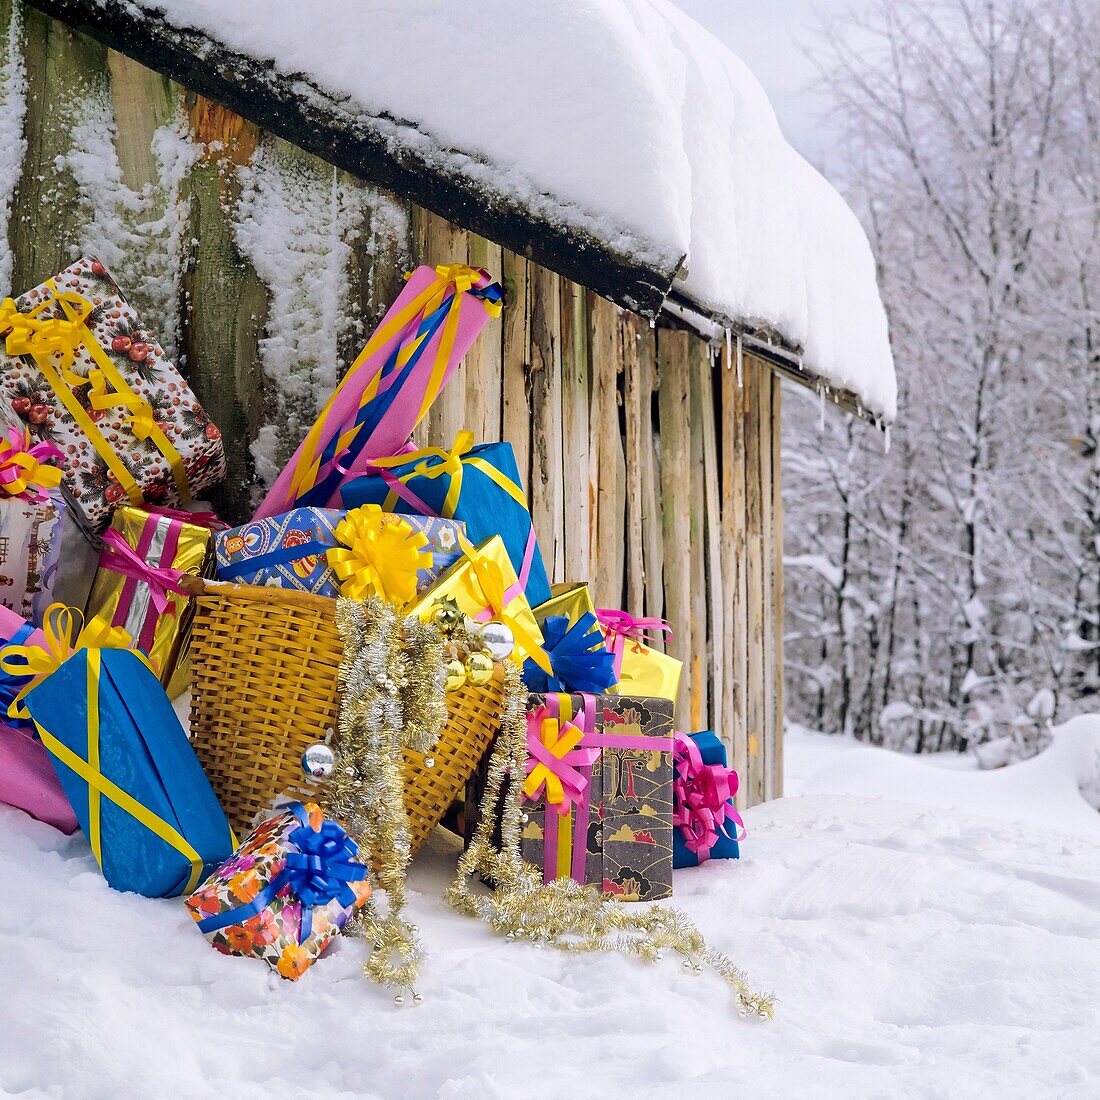 Christmas presents by log hut with snowy roof